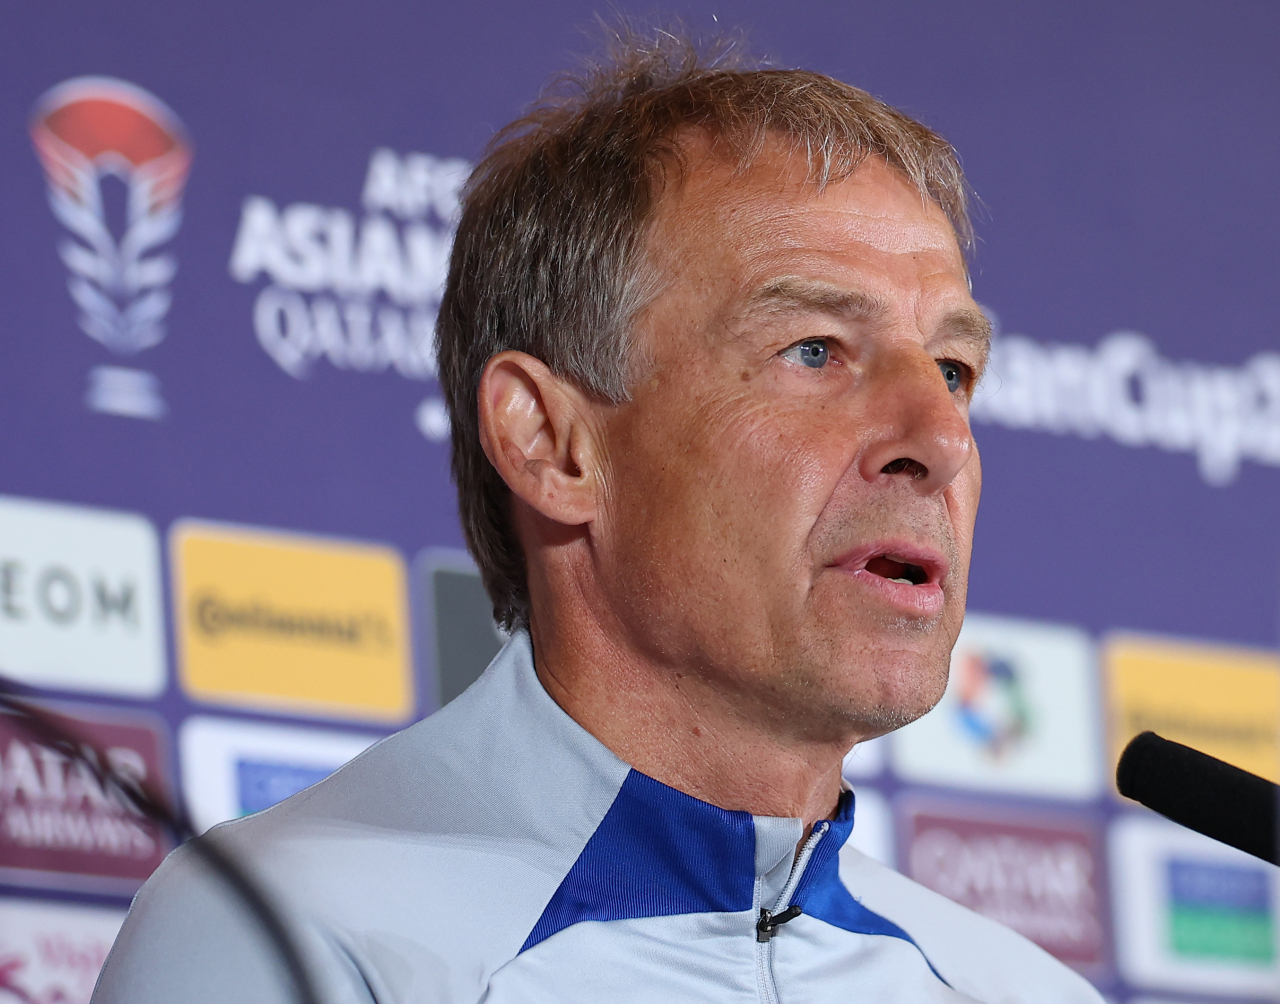 South Korea head coach Jurgen Klinsmann speaks at a press conference ahead of a Group E match against Jordan at the Asian Football Confederation Asian Cup at the Main Media Centre in Doha on Friday. (Yonhap)